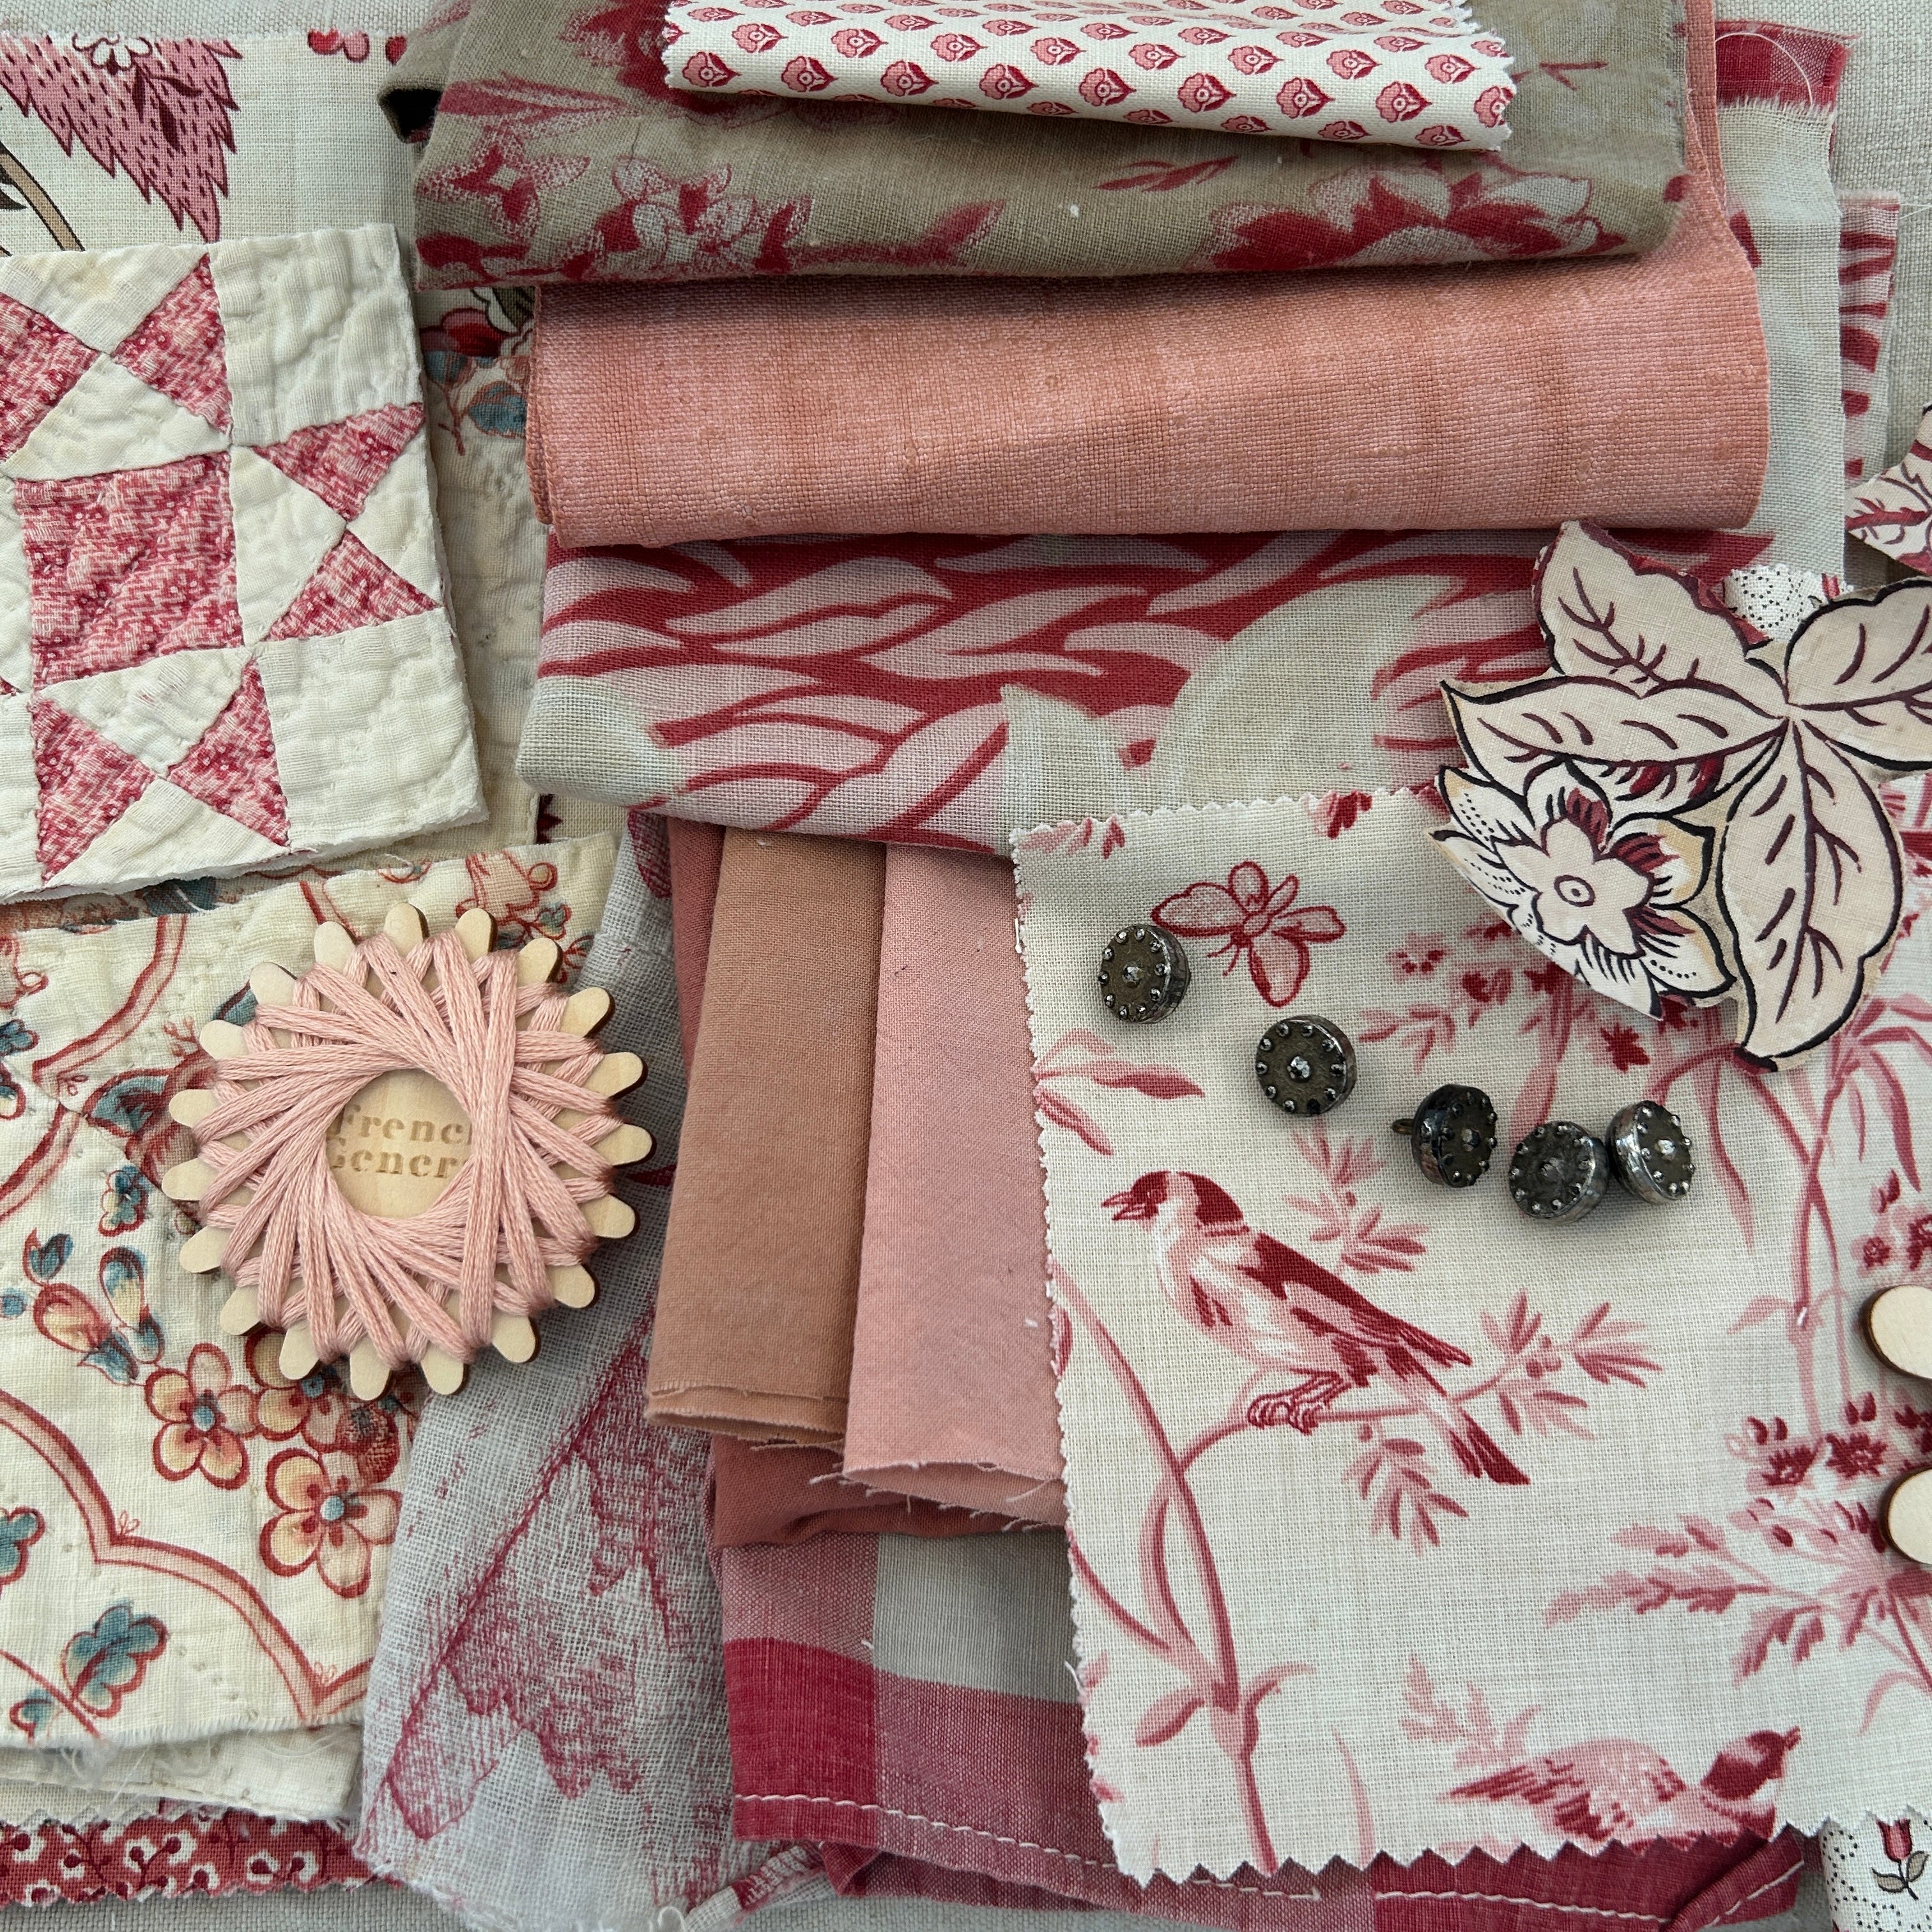 Embroidered Vintage Fabric Swatches